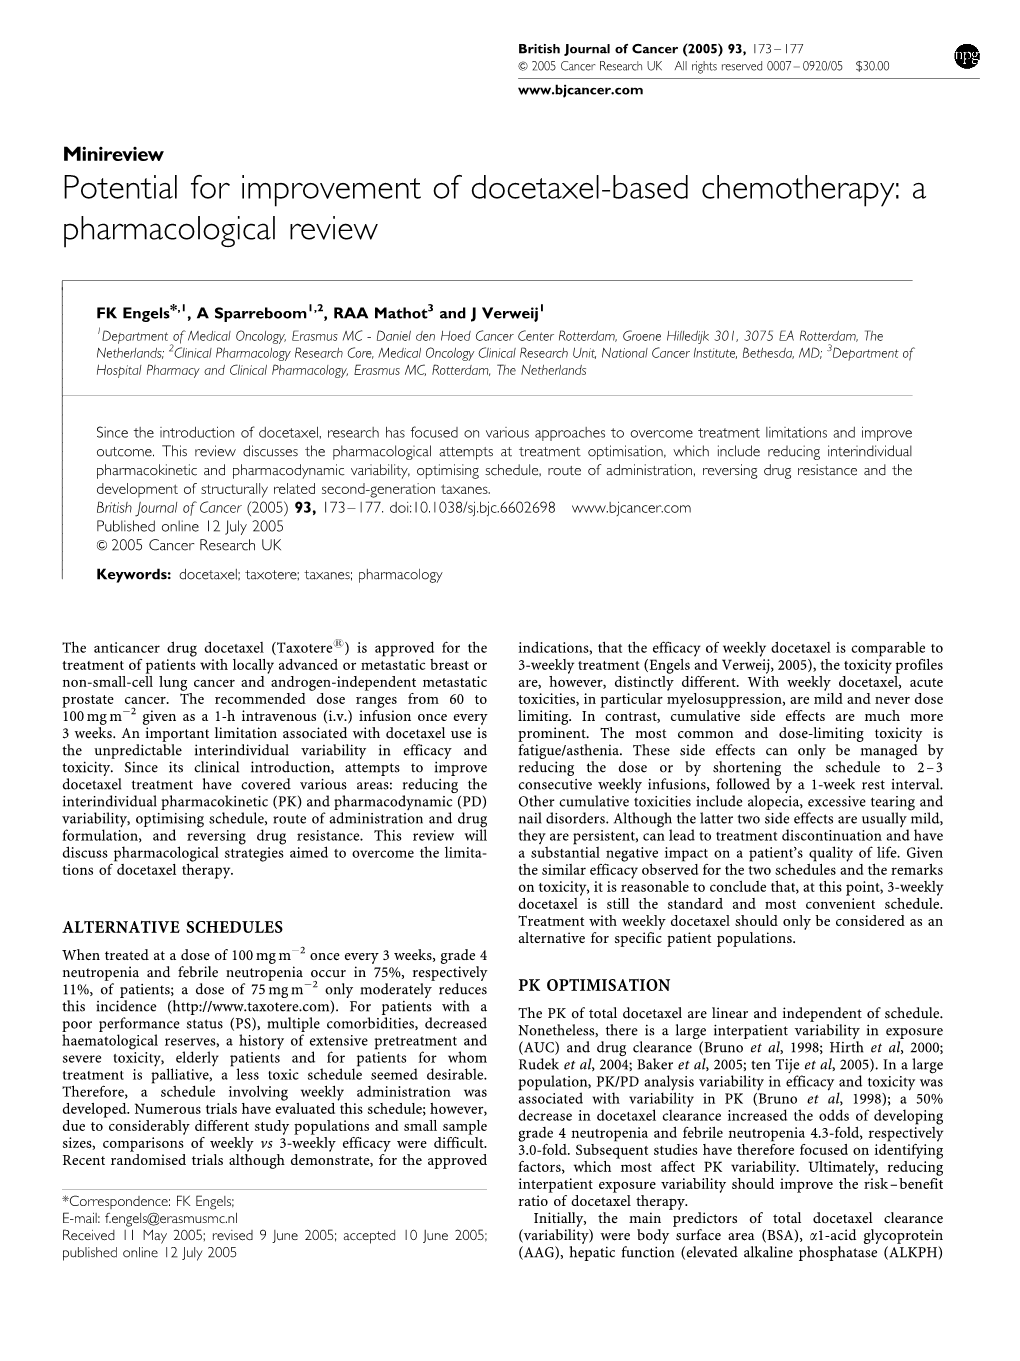 Potential for Improvement of Docetaxel-Based Chemotherapy: a Pharmacological Review